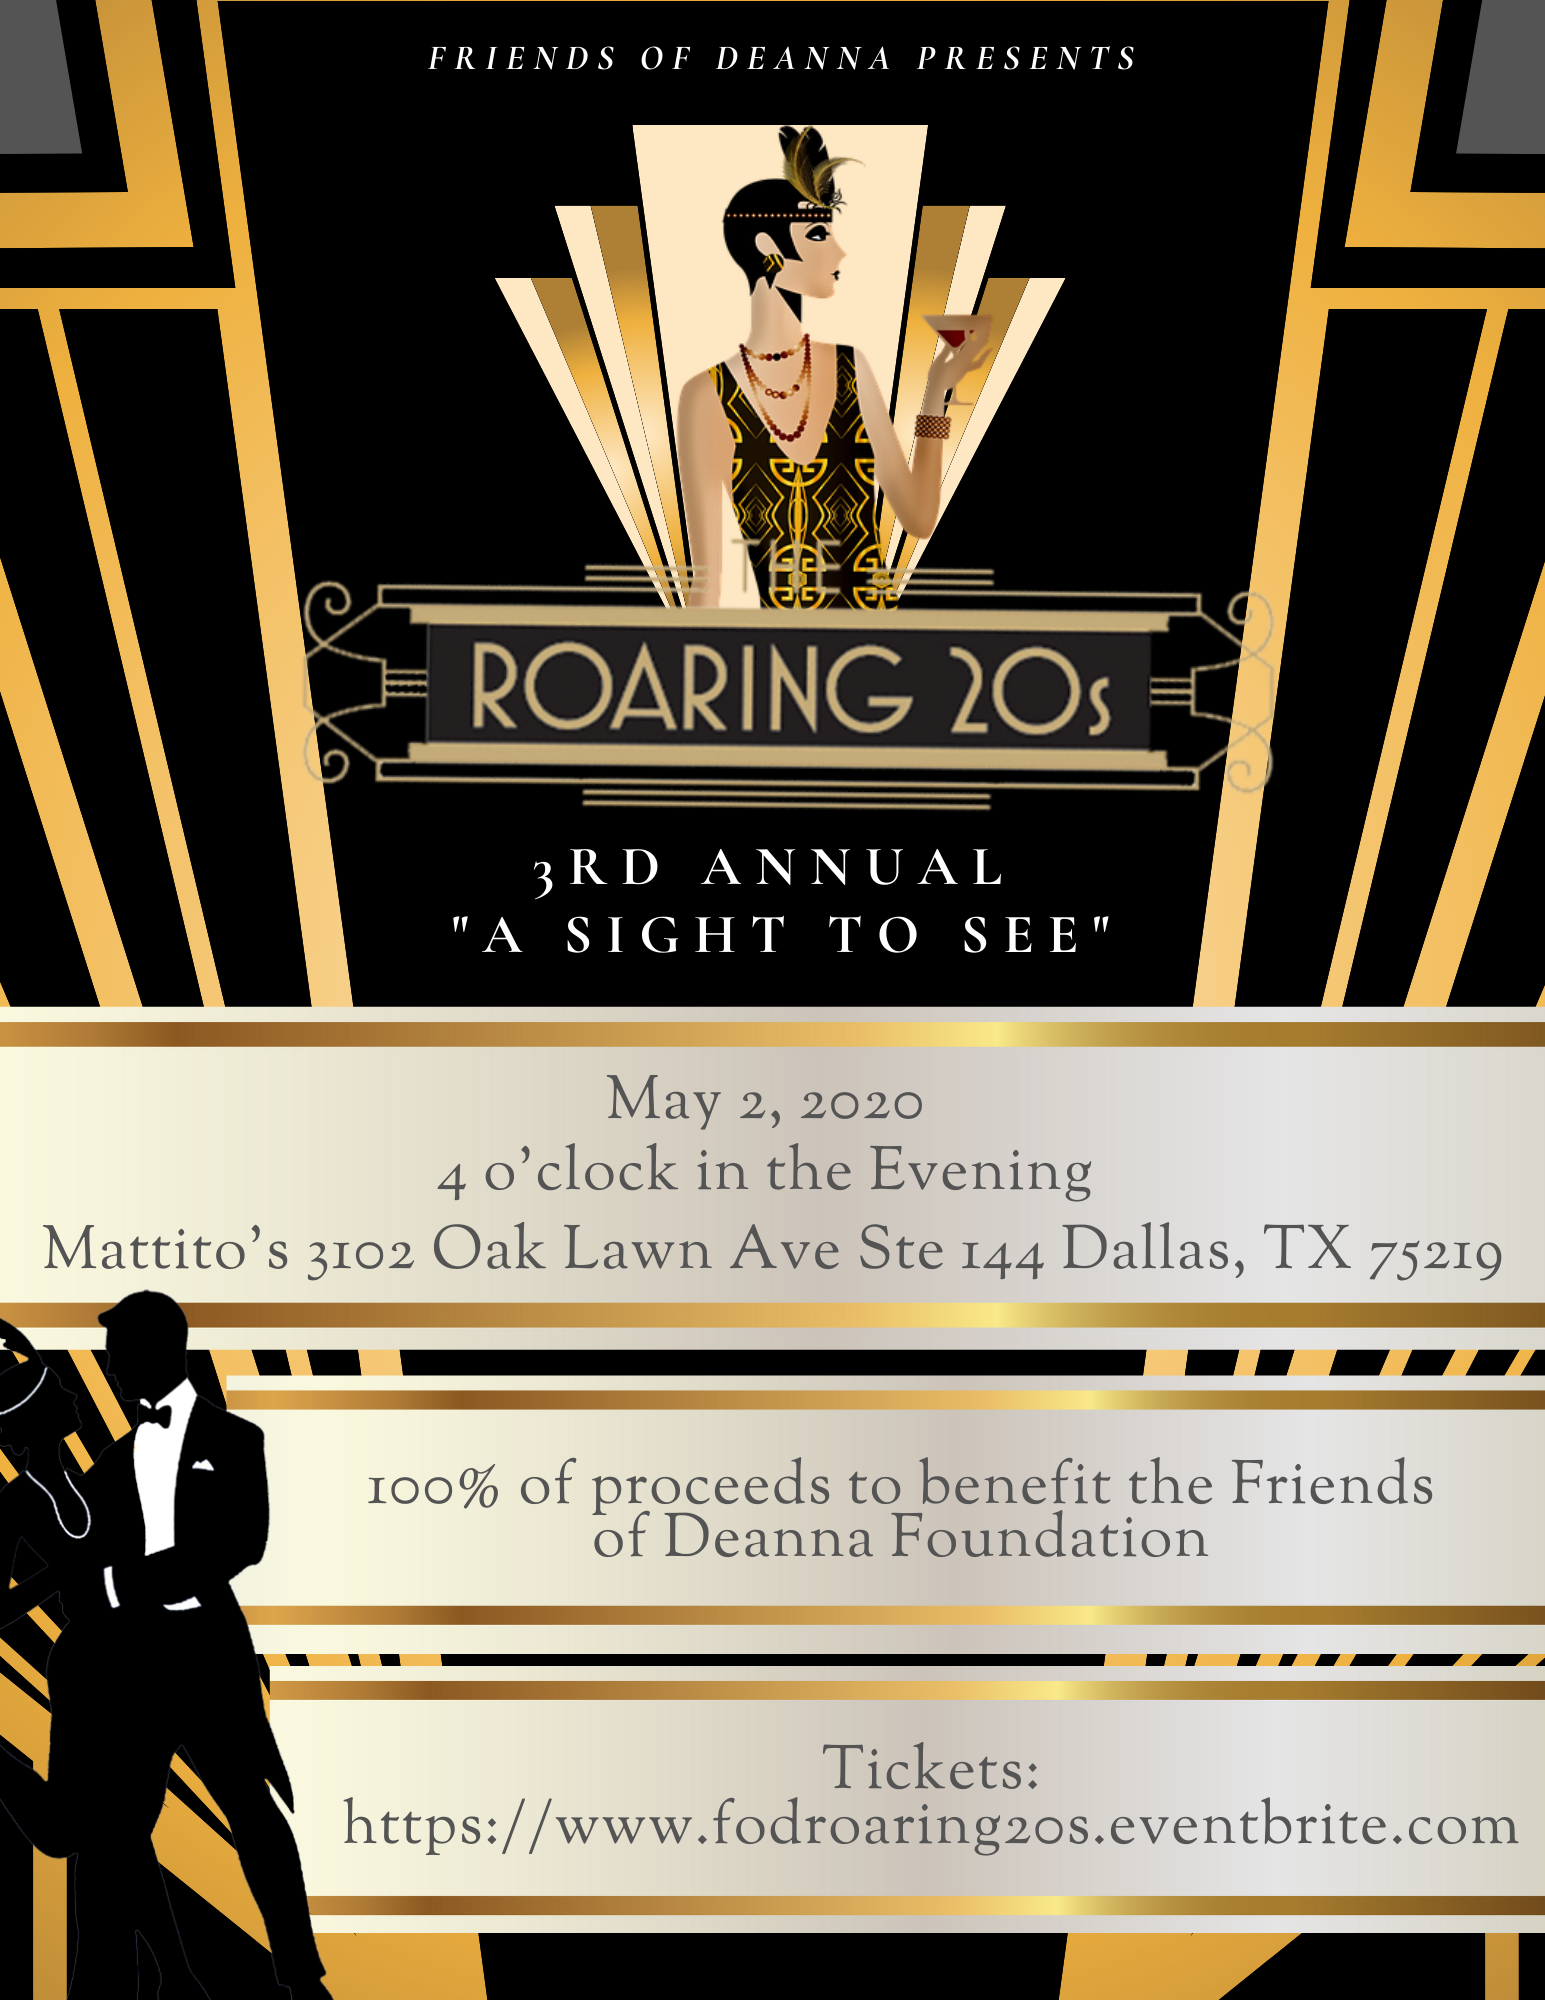 Friends of Deanna presents the 3rd Annual A Sight to See: The Roaring 20s